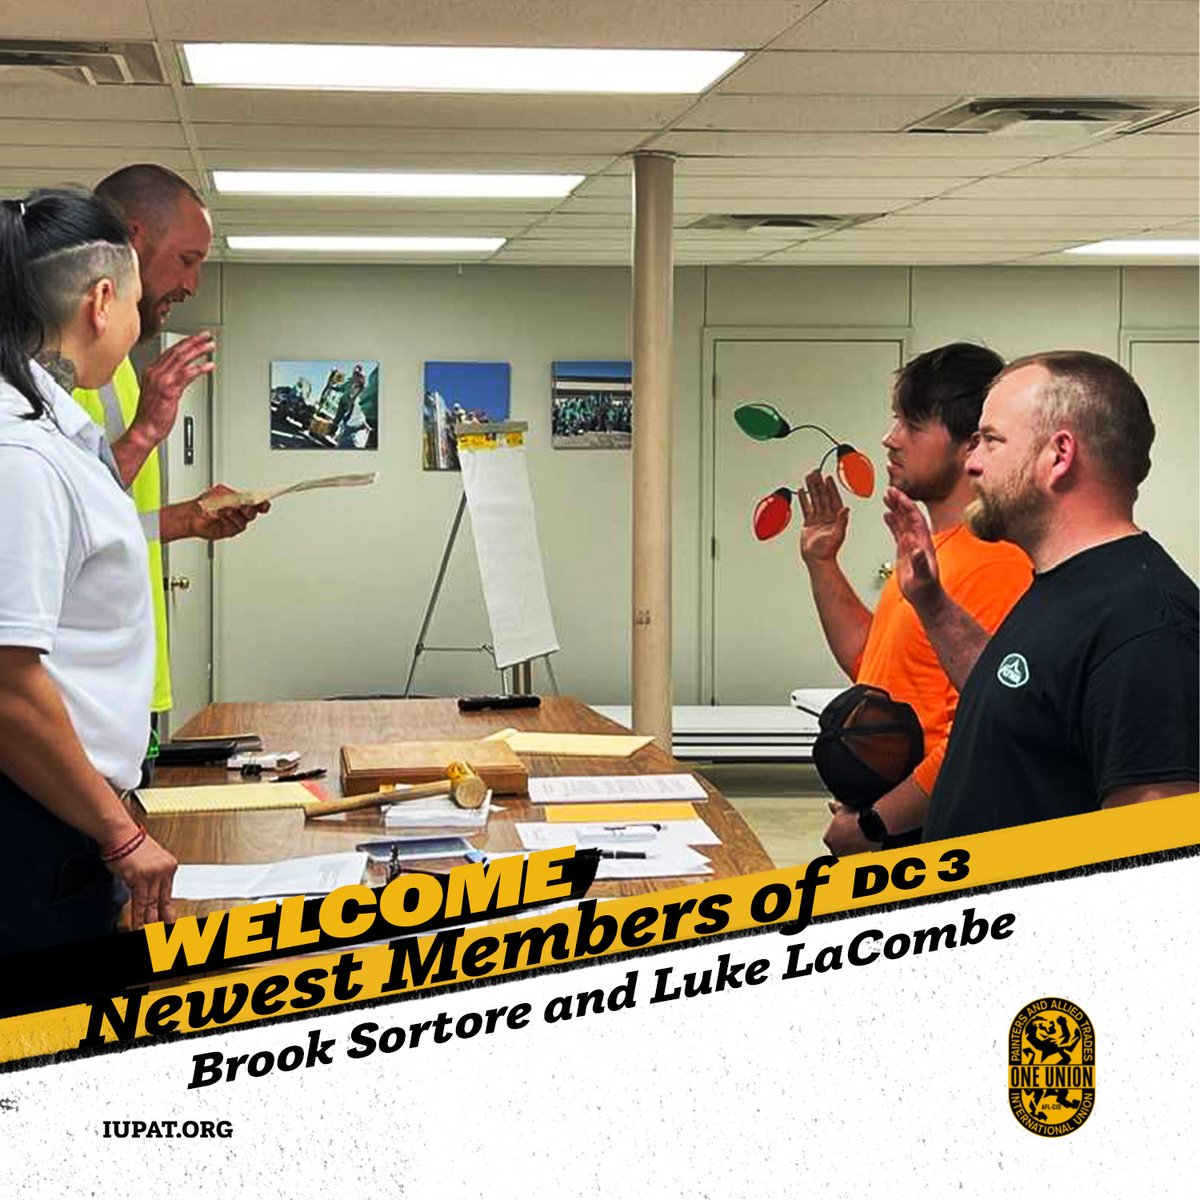 It is each and every one of us that shapes and moves our union forward every single day. Please join us in welcoming our two newest members in Kansas City, @IUPATDC3 LU 558 glaziers Brook Sortore and Luke LaCombe!